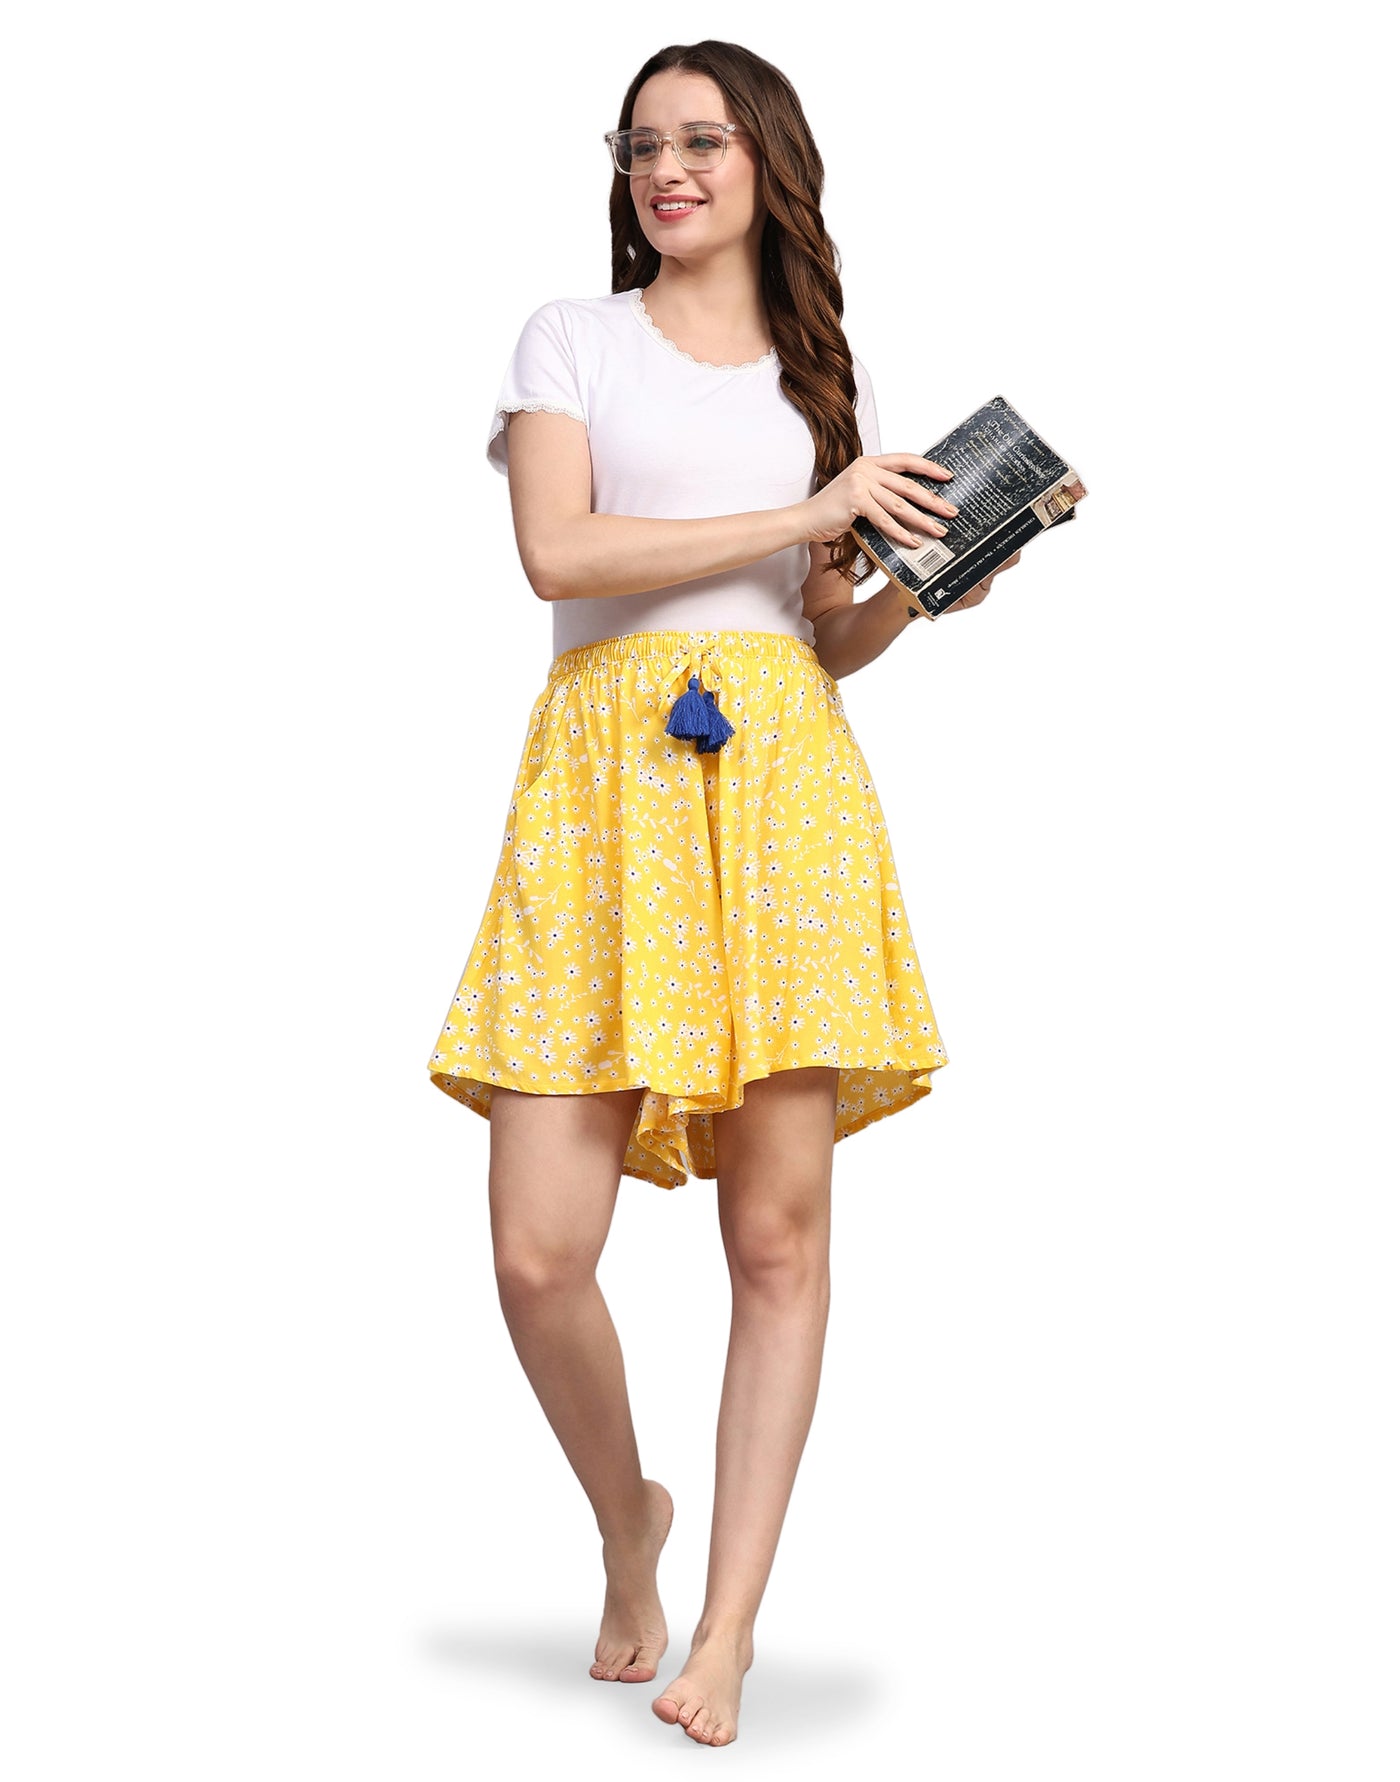 Culotte Shorts for Women-Yellow Tiny Floral